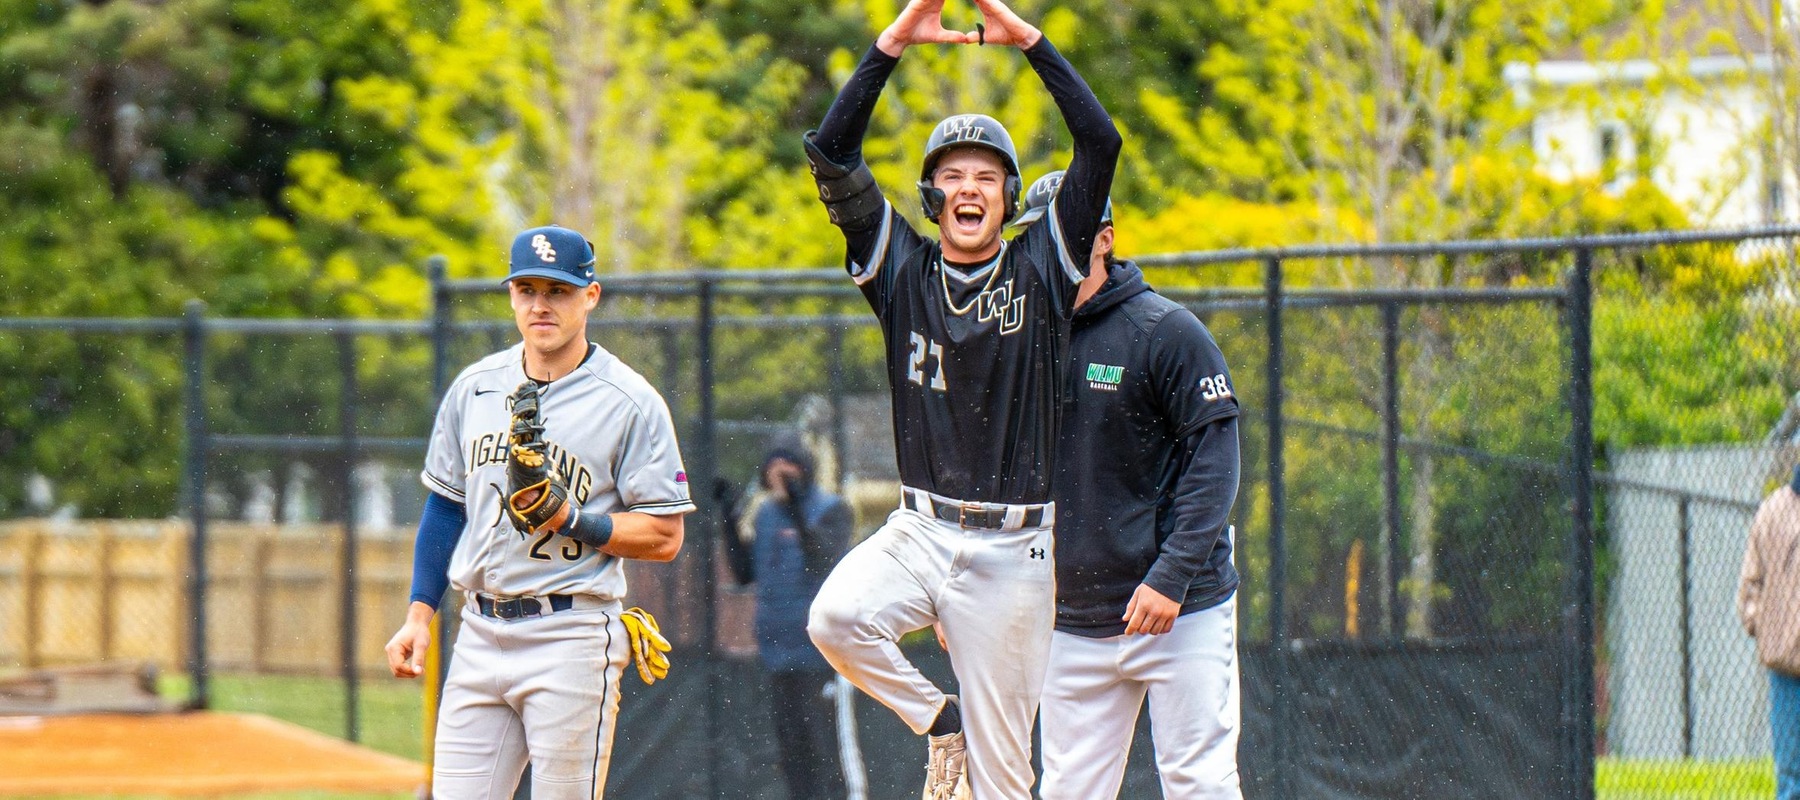 Photo of Shawn Edevane who had the game-winning RBI with a bunt single in the 6th against Goldey-Beacom. Copyright 2024; Wilmington University. All rights reserved. Photo by Giovanni Badalamenti. April 27, 2024 vs. Goldey-Beacom.